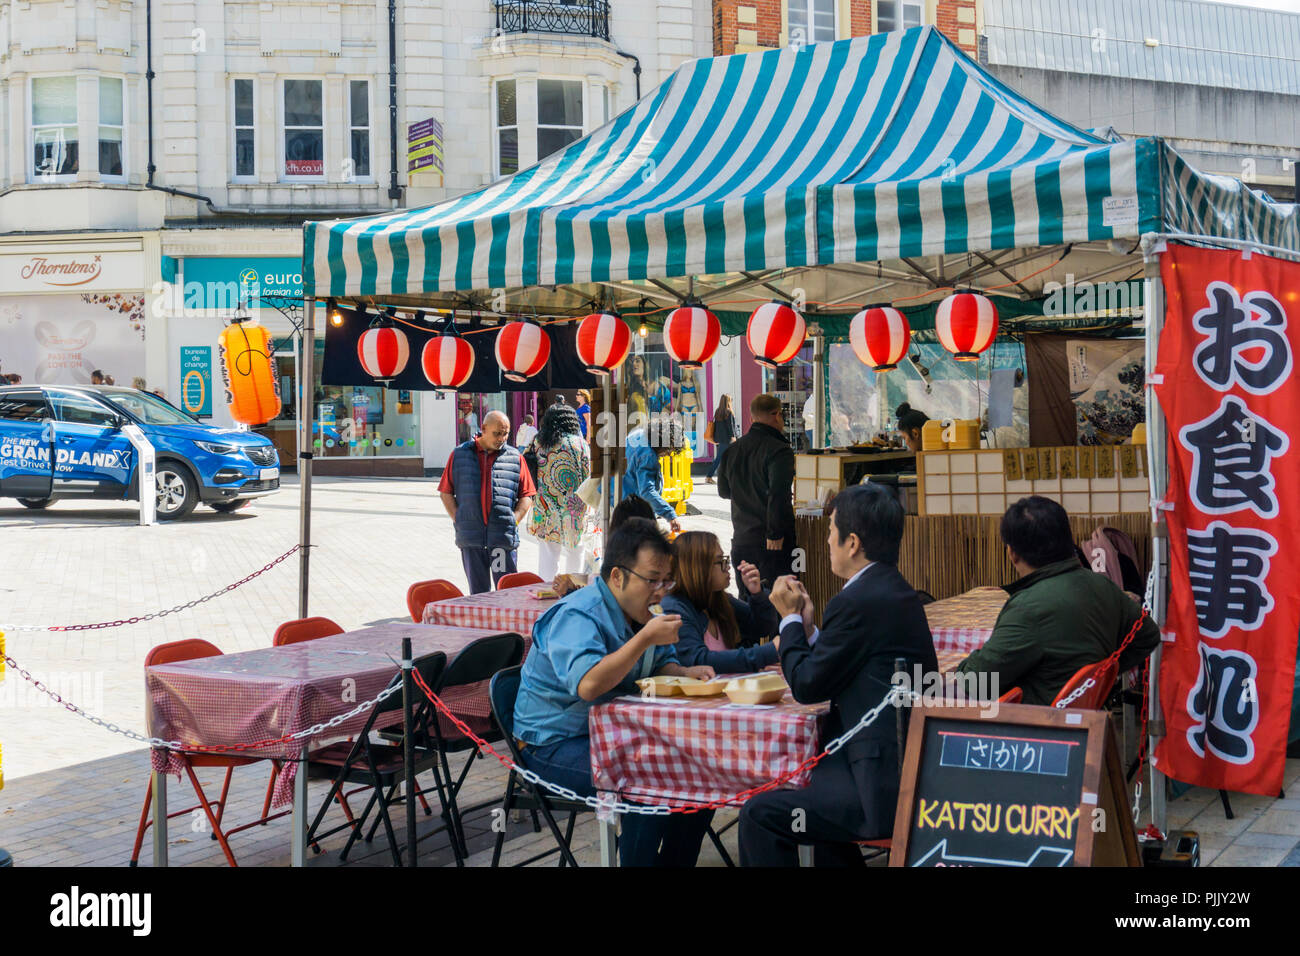 Street food stall in Bromley Market Square selling Japanese Katsu Curry. Stock Photo